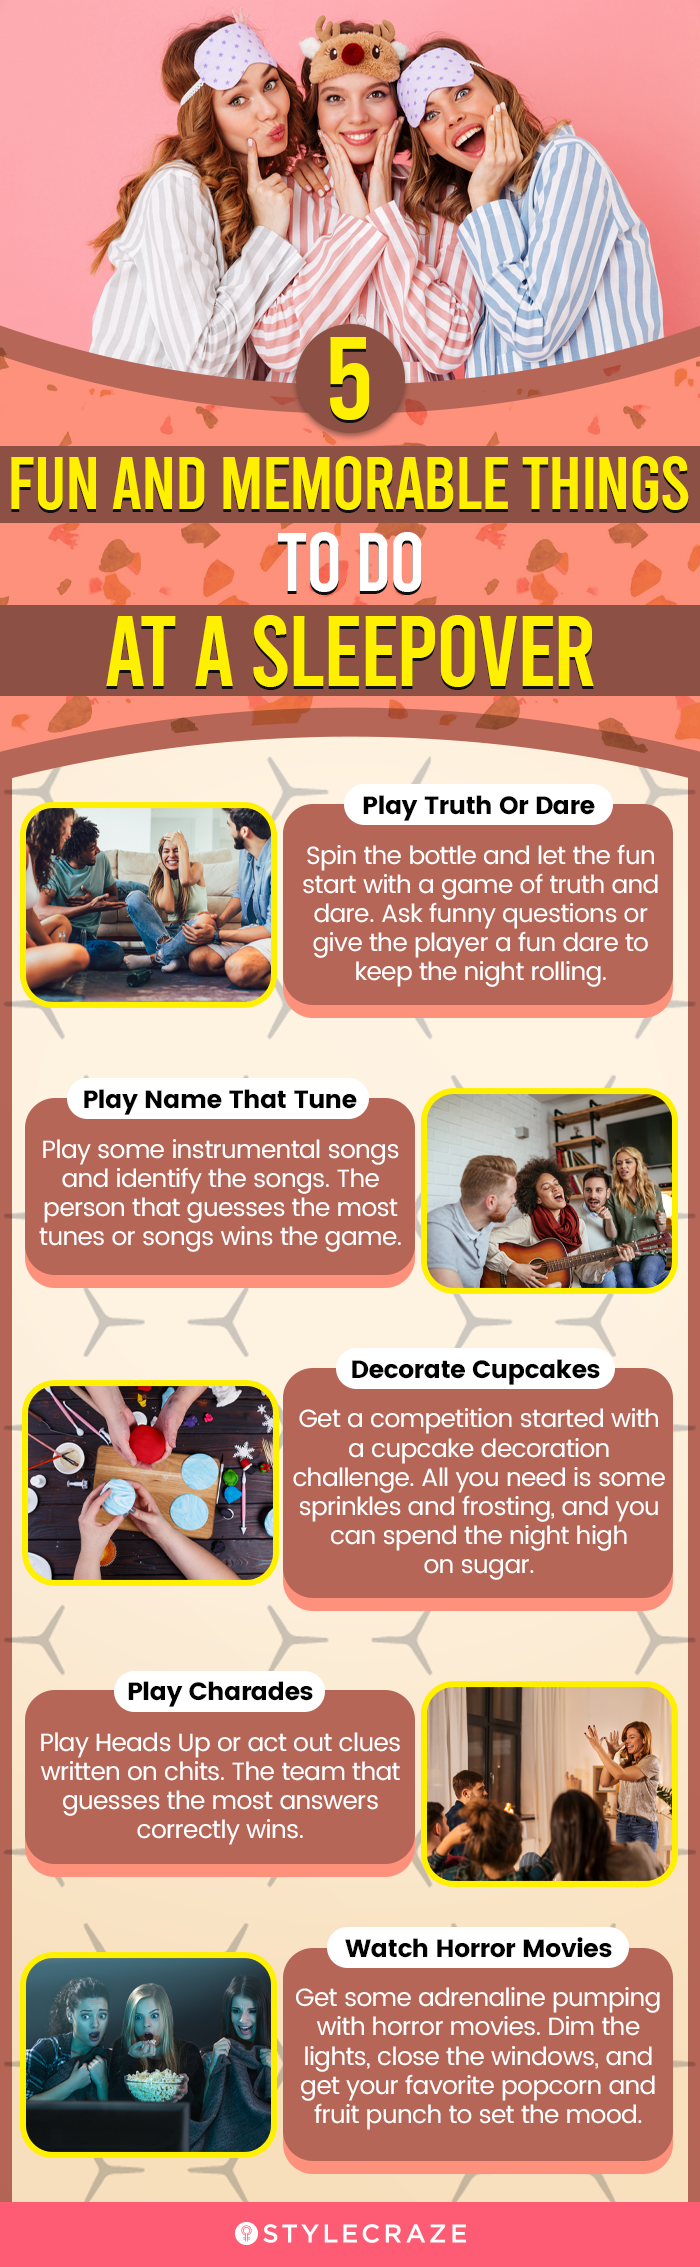 5 fun and memorable things to do at a sleepover (infographic)